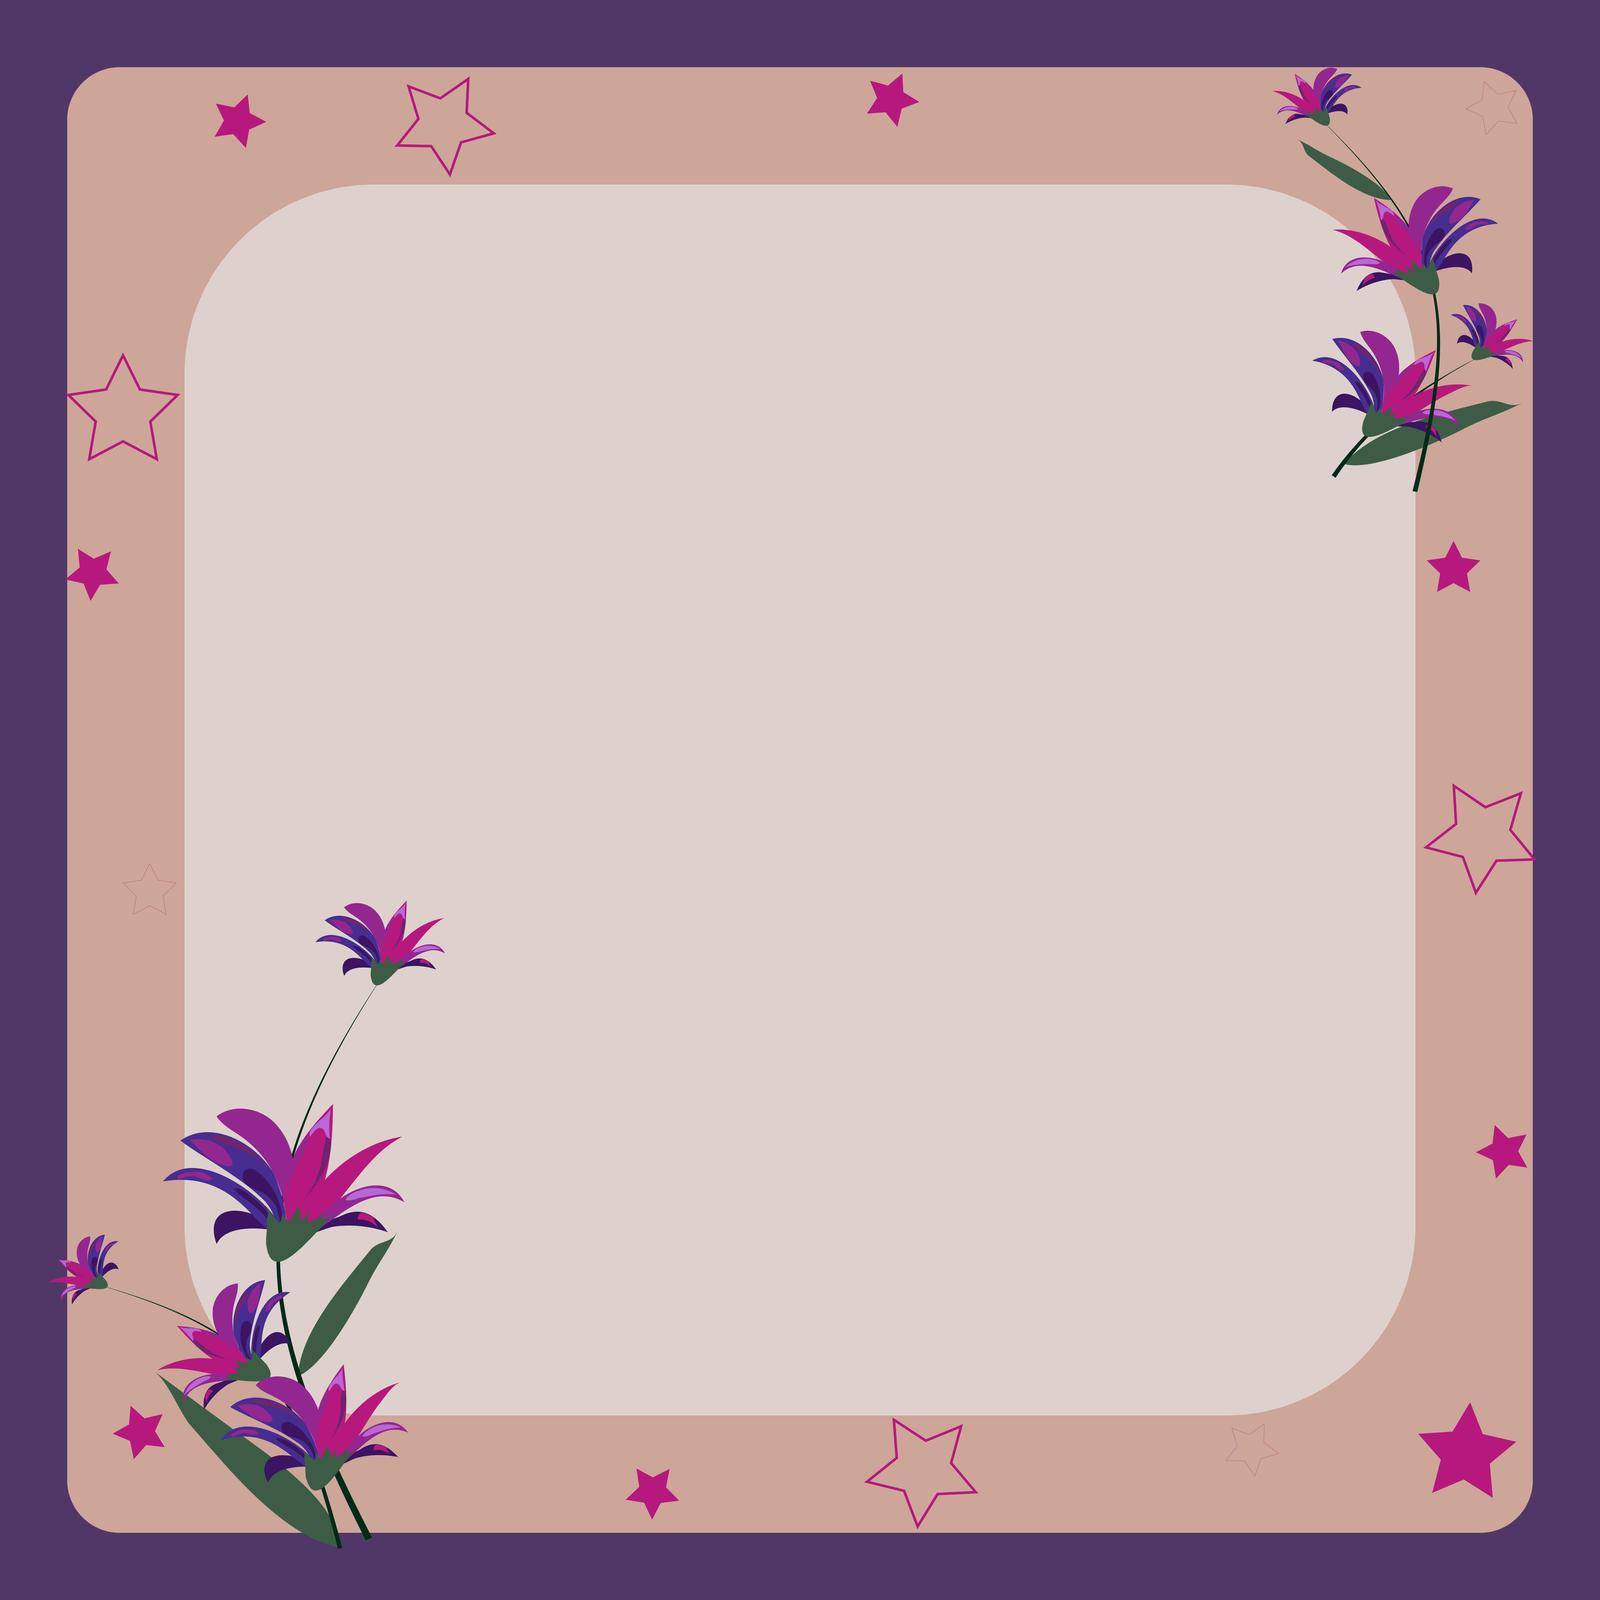 Frame Decorated With Colorful Flowers And Foliage Arranged Harmoniously.